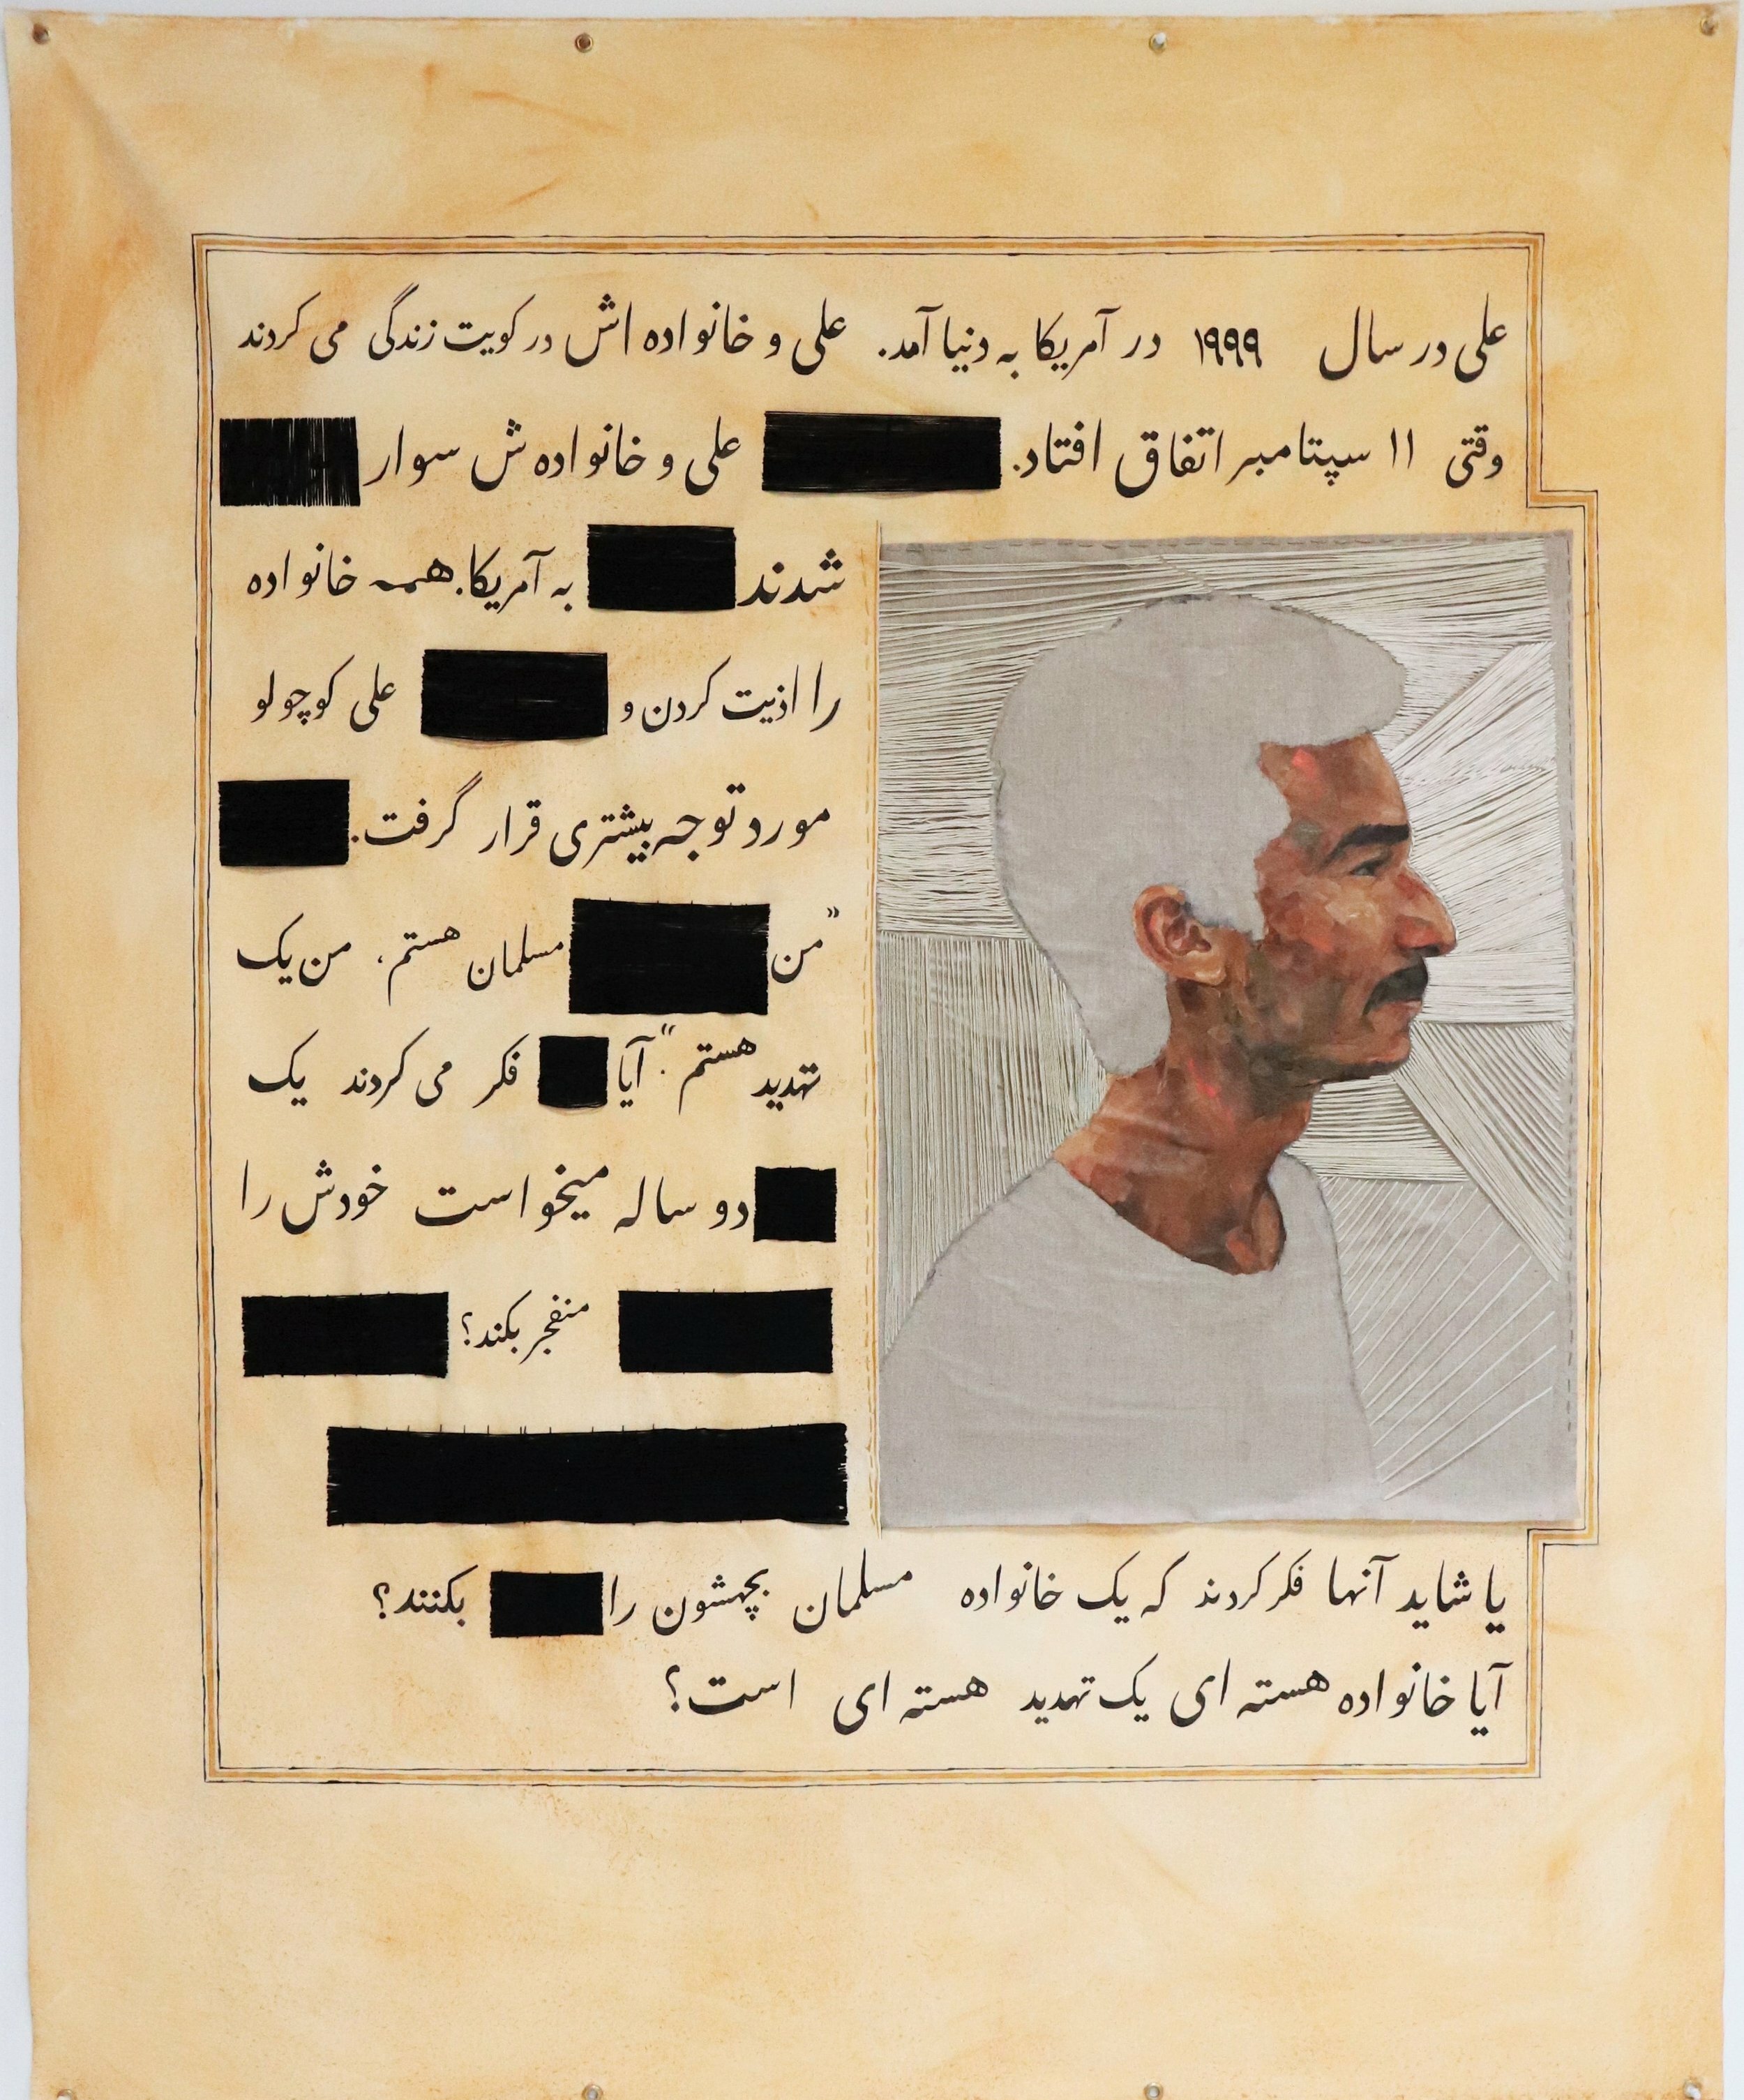 On a tan background, an outlined rectangle sits on the middle. Farsi is written inside the outline, black marks blacking out certain words. An image of an individual is off center, floating in the words. The figure seems to be disappearing.